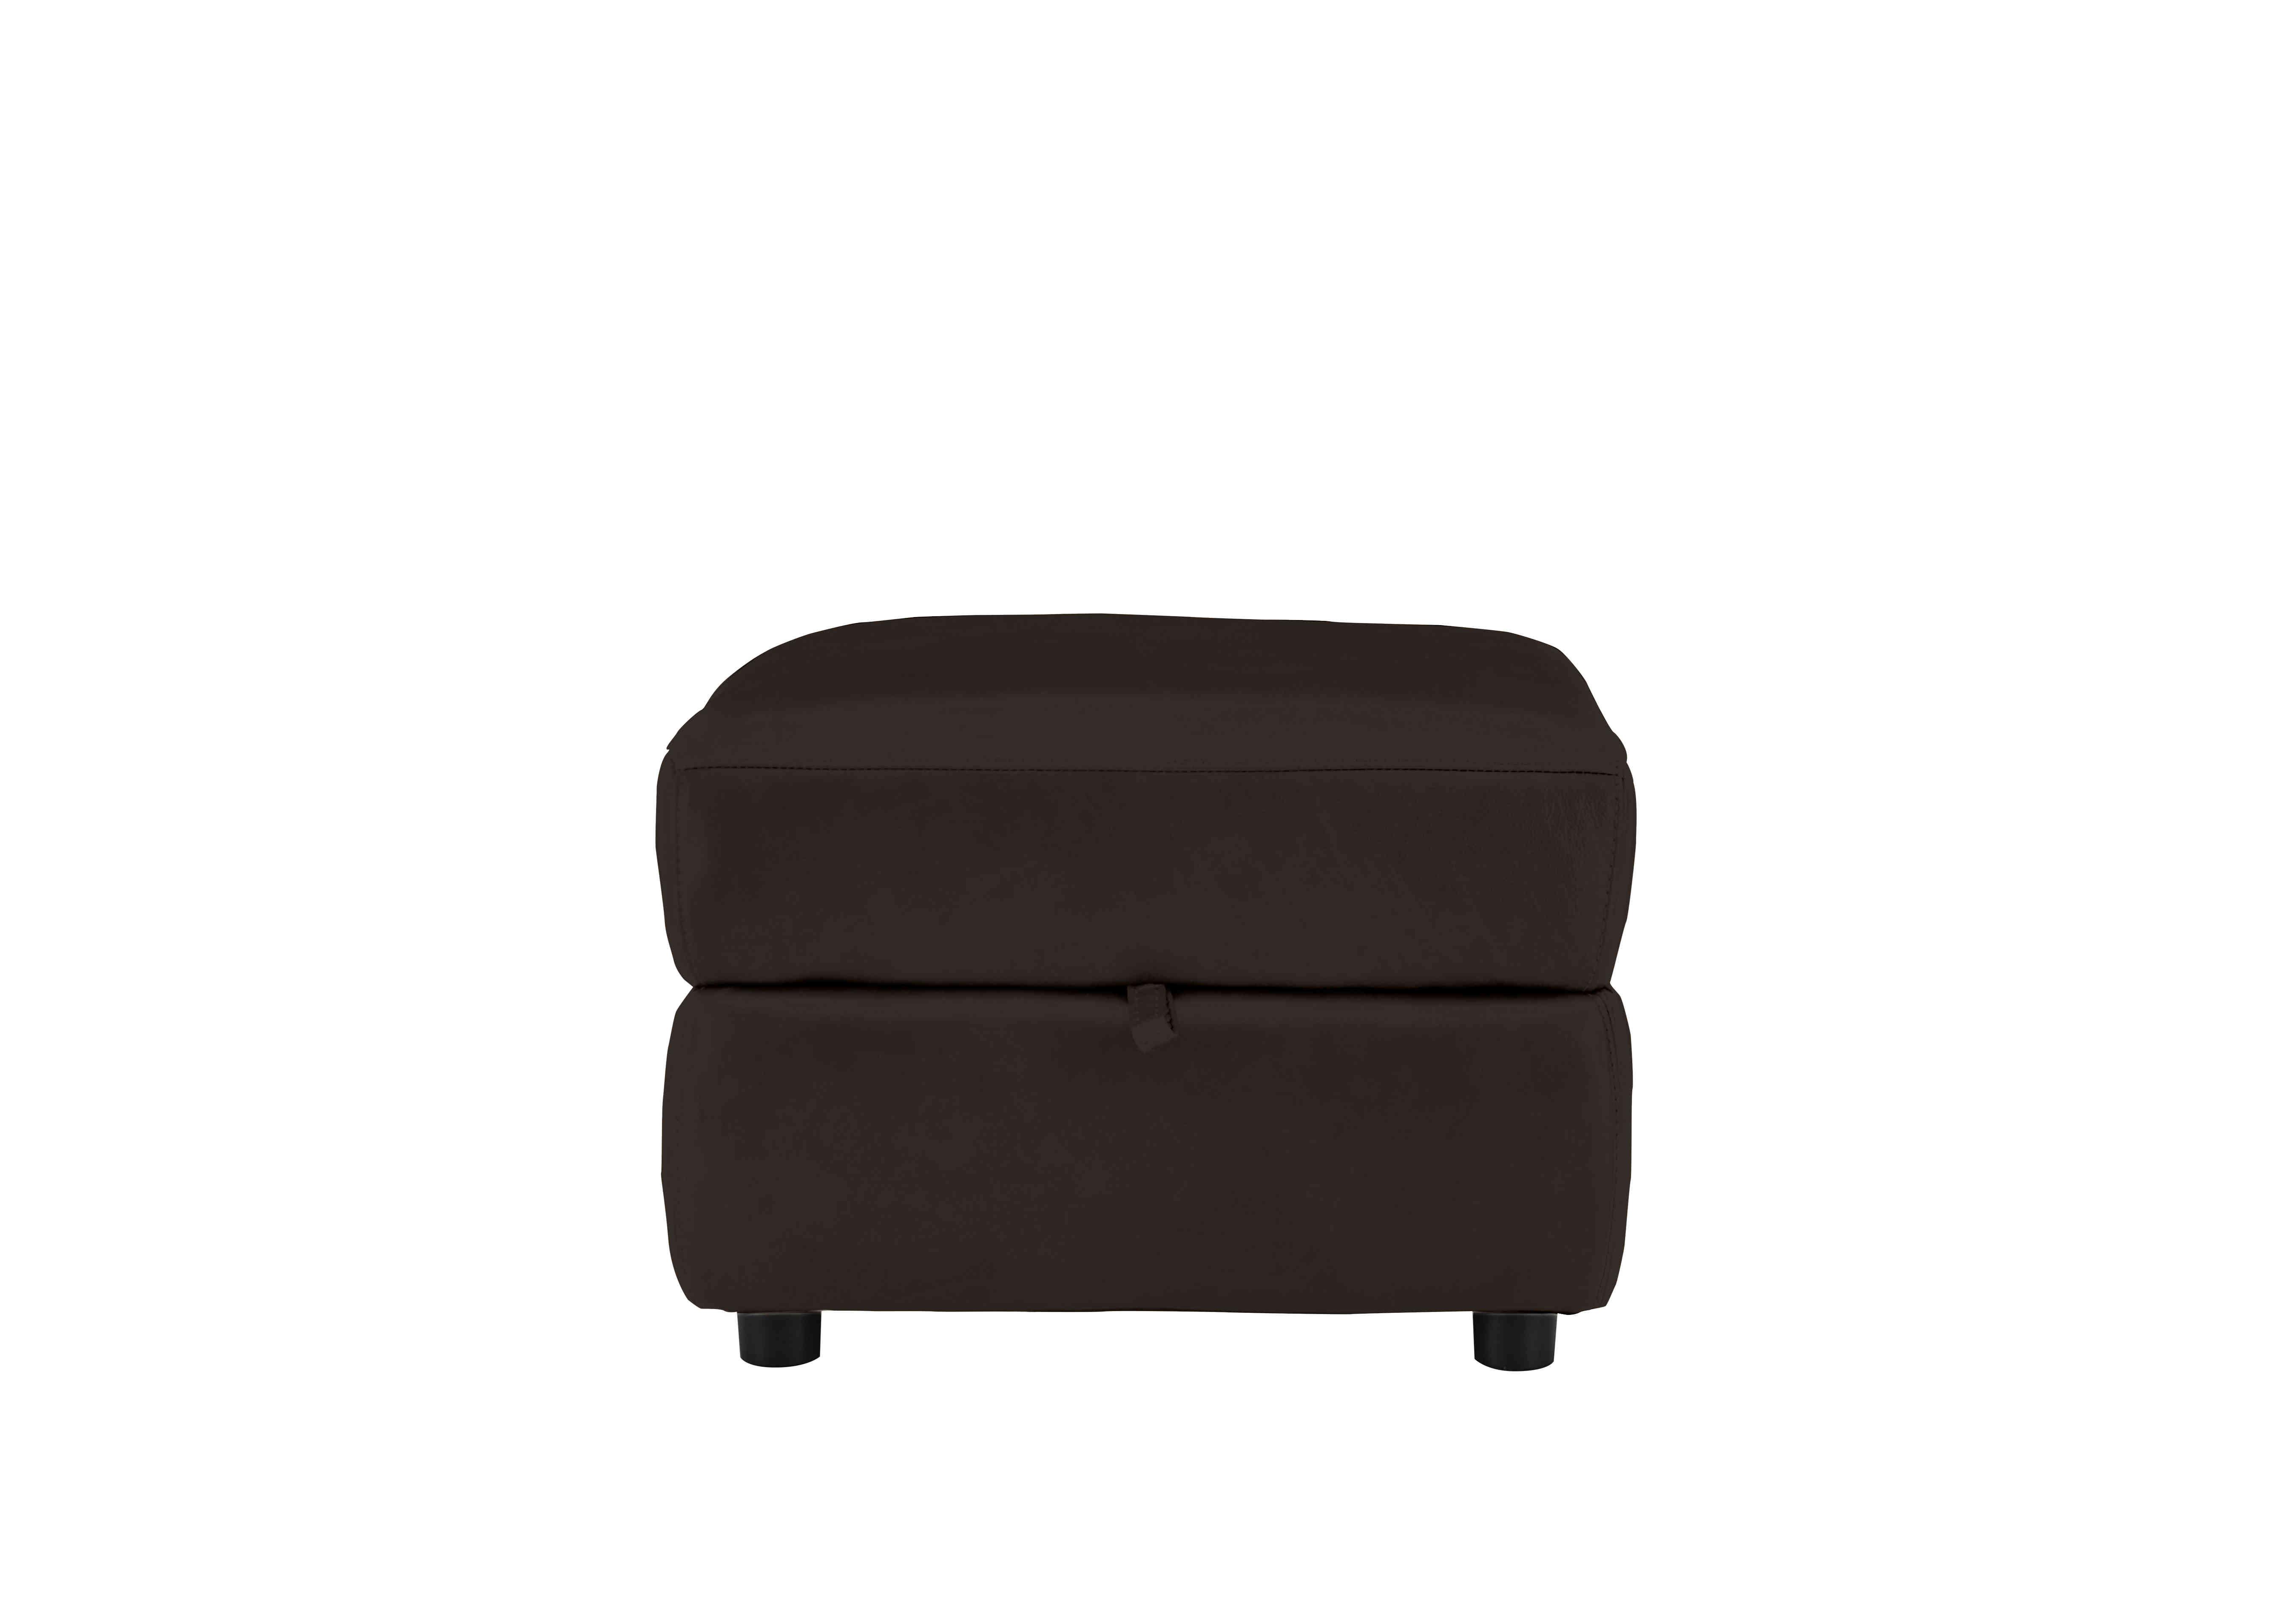 Relax Station Revive Leather Storage Footstool in Bv-1748 Dark Chocolate on Furniture Village